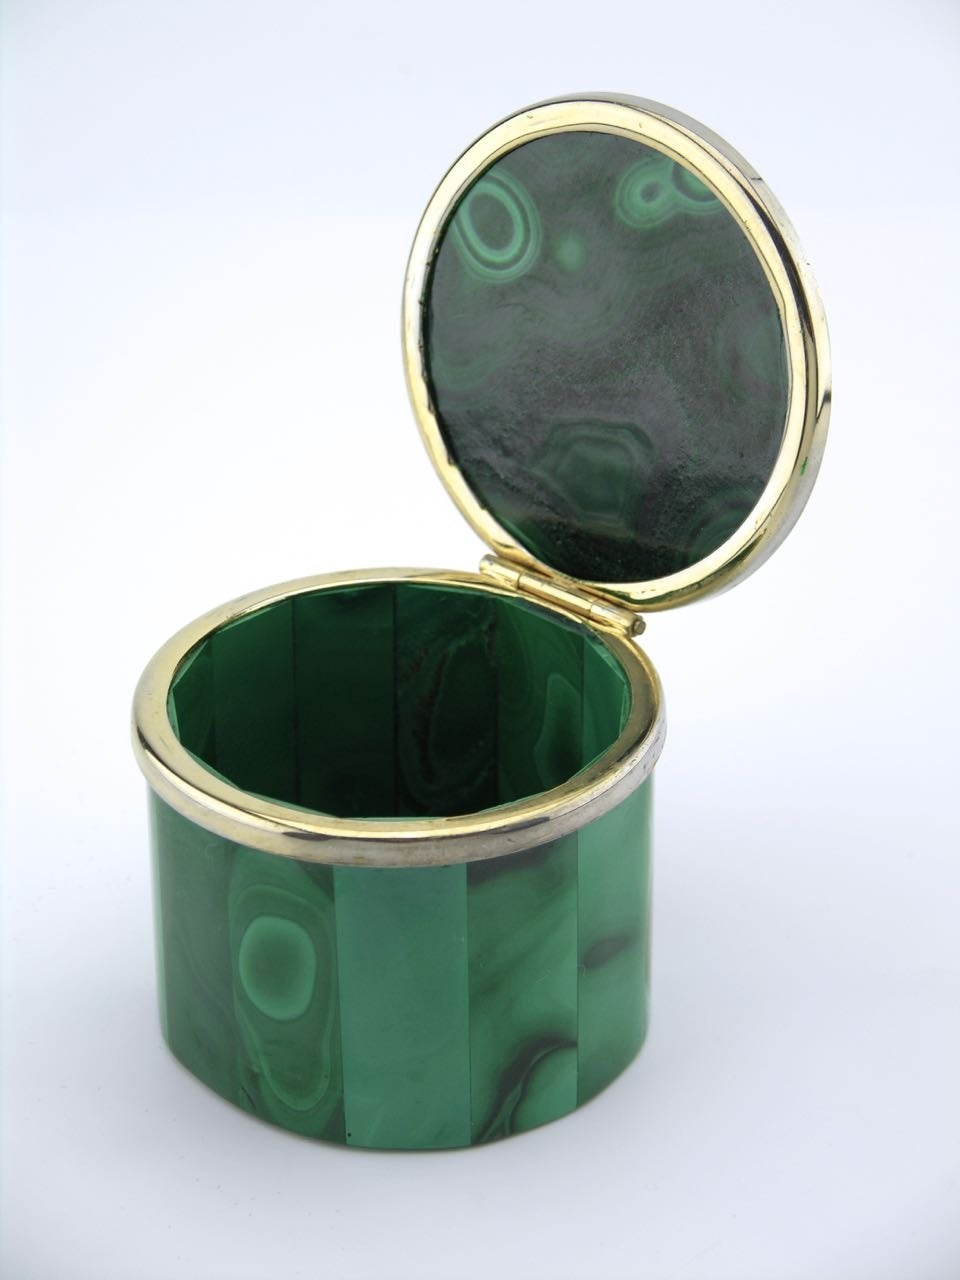 A cylindrical table box featuring a large thick cabochon panel of bulls eye malachite in the lid. The faceted base made of small panels of malachite arranged edge to edge.

A gold plated metal hinge and rim to the top.